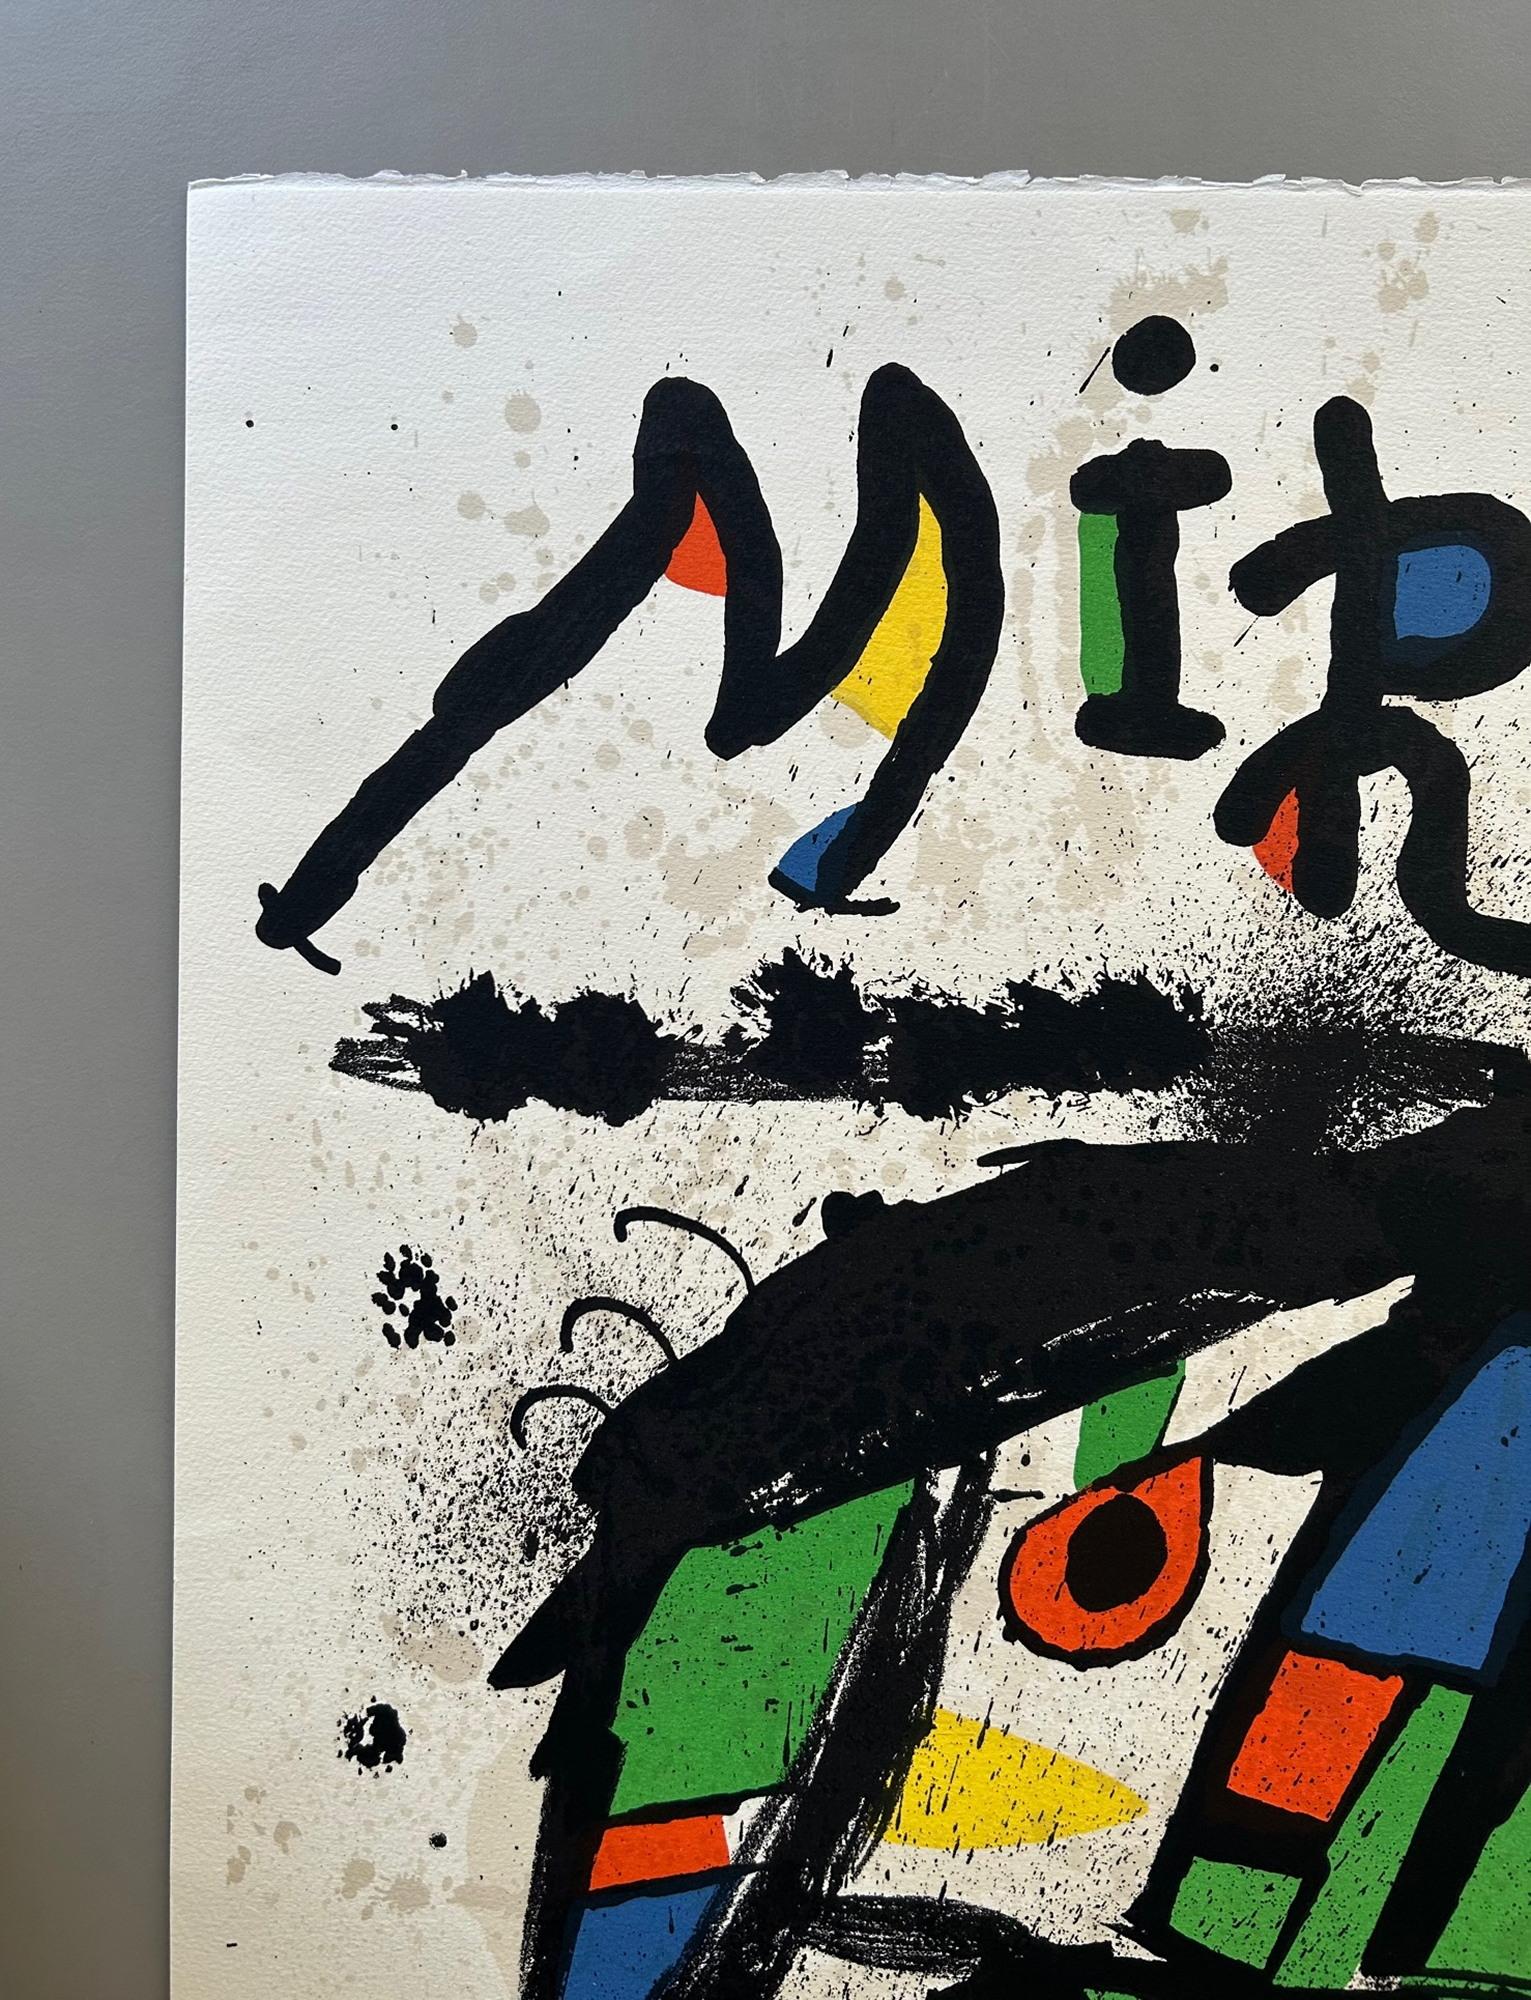 Poster for Joan Miro Exhibition at Galerie Maeght

Lithograph printed in colours for an exhibition of Miro's work in Paris from November 1978 to January 1979 signed in pencil from an edition of 75.

This one numbered 37/75 on wove paper

Printed by